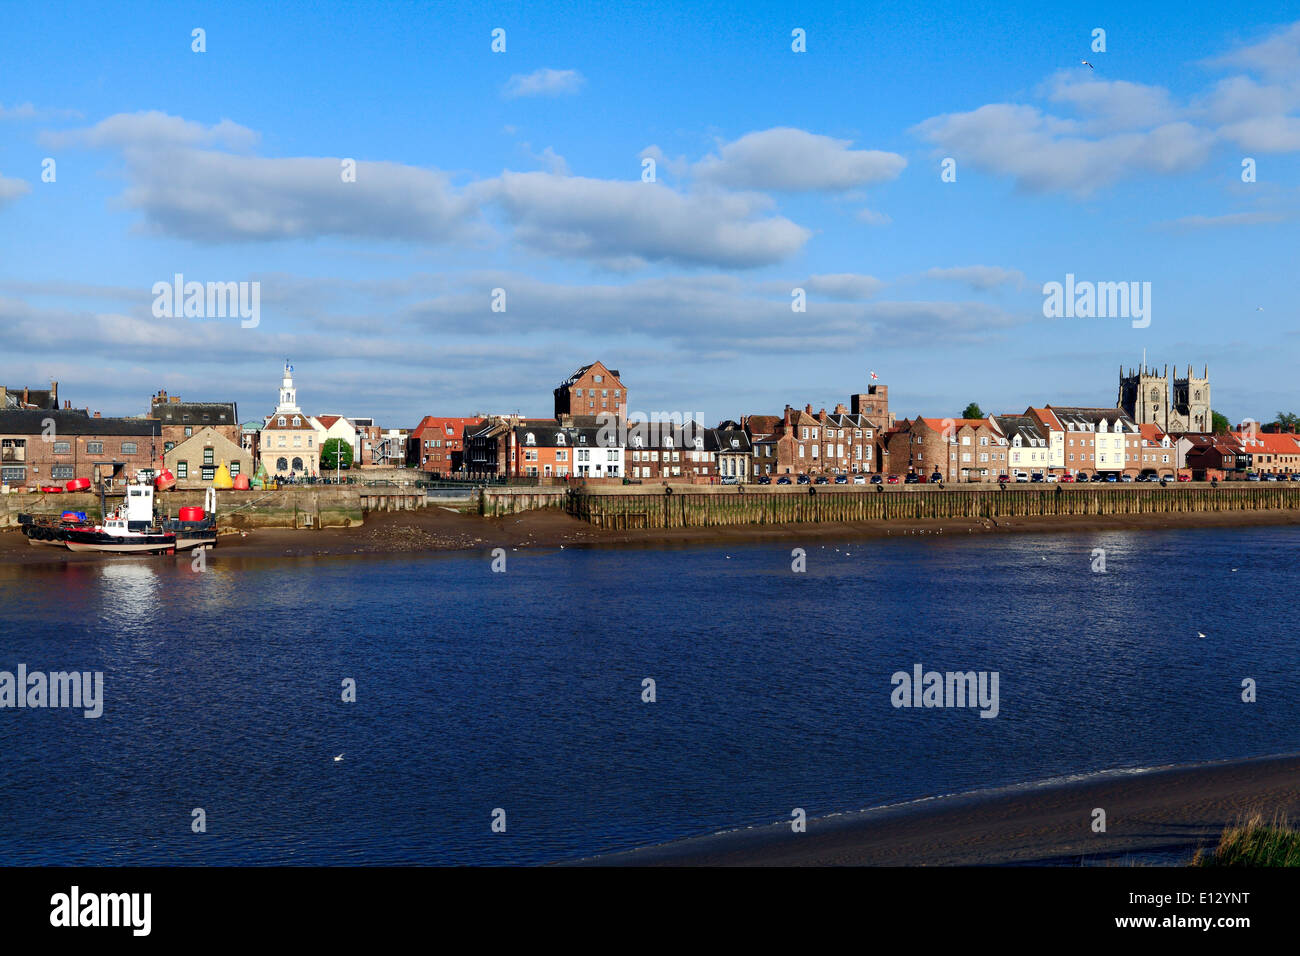 Kings Lynn, Quayside, Town and Customs Custom House, Norfolk, view across River Ouse from West Lynn England UK panoramic Stock Photo